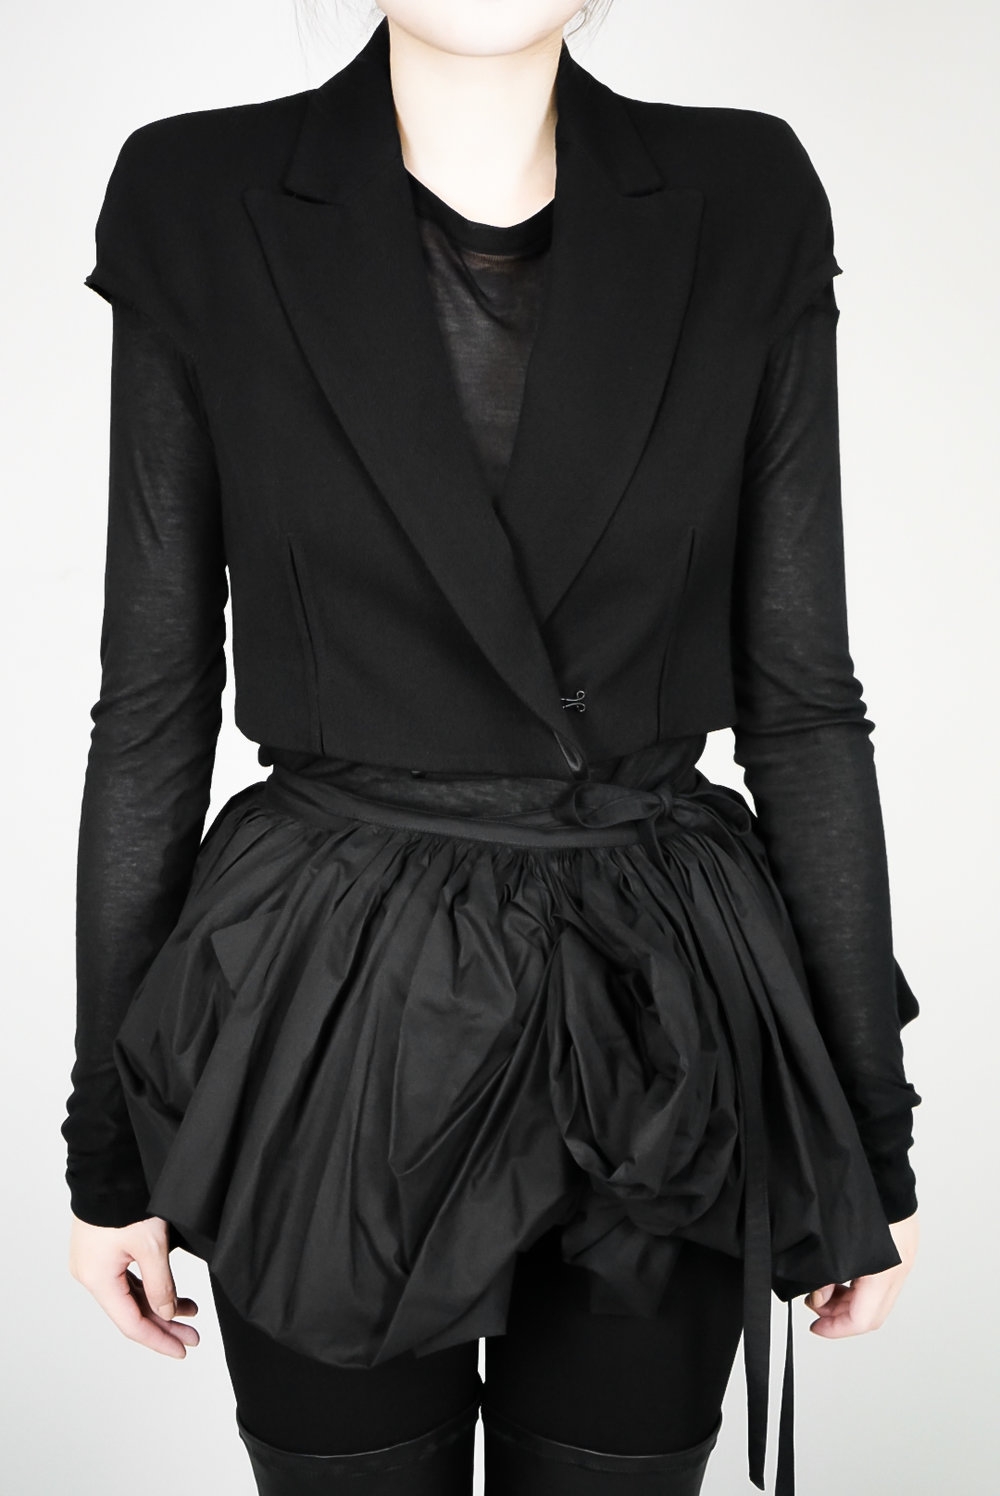 Ann Demeulemeester – Womens – Cropped Jacket – Black – Fleesewool / Rayon – Tailored – Sleeveless – Front Button Closing – Shoulder Pads